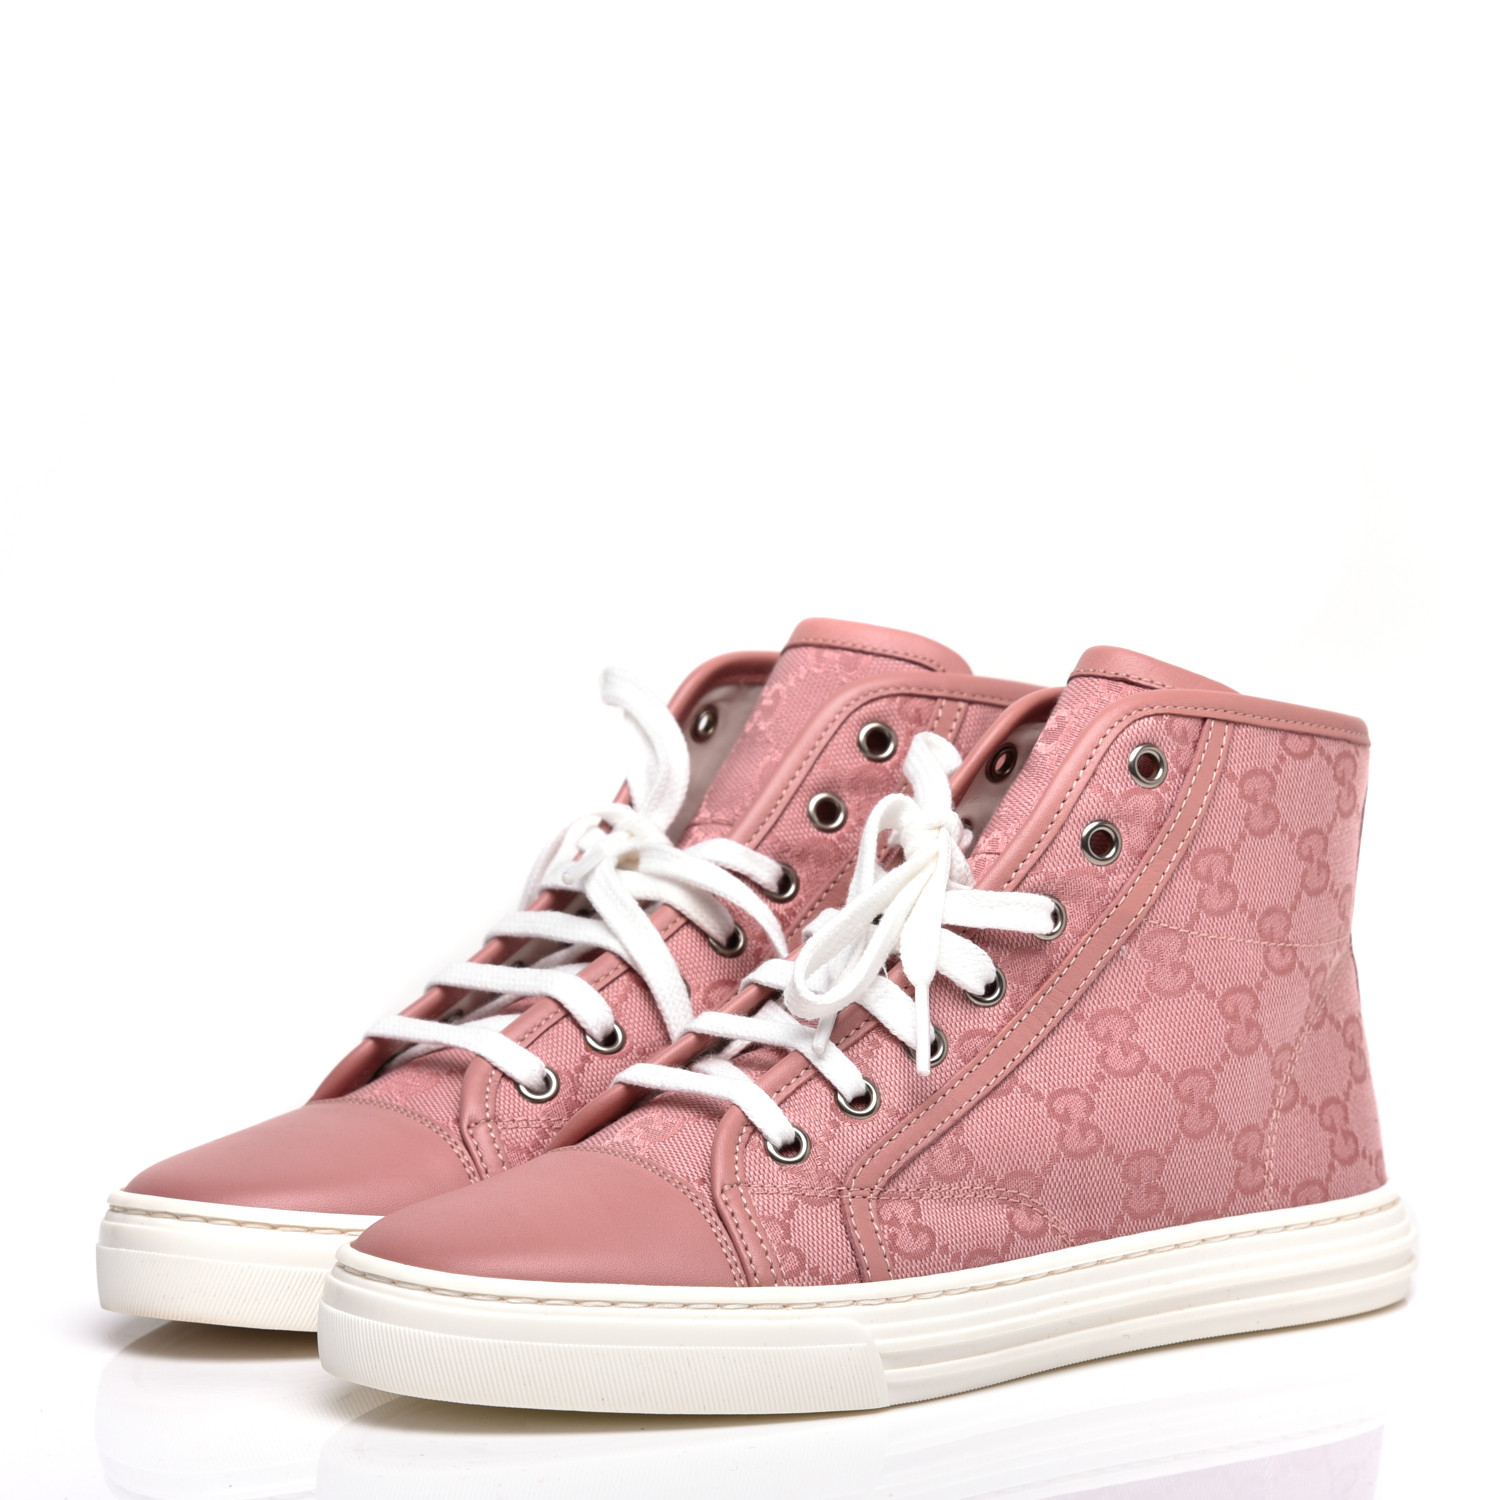 GUCCI Monogram Womens High Top Sneakers 37 Pink 719103 | FASHIONPHILE